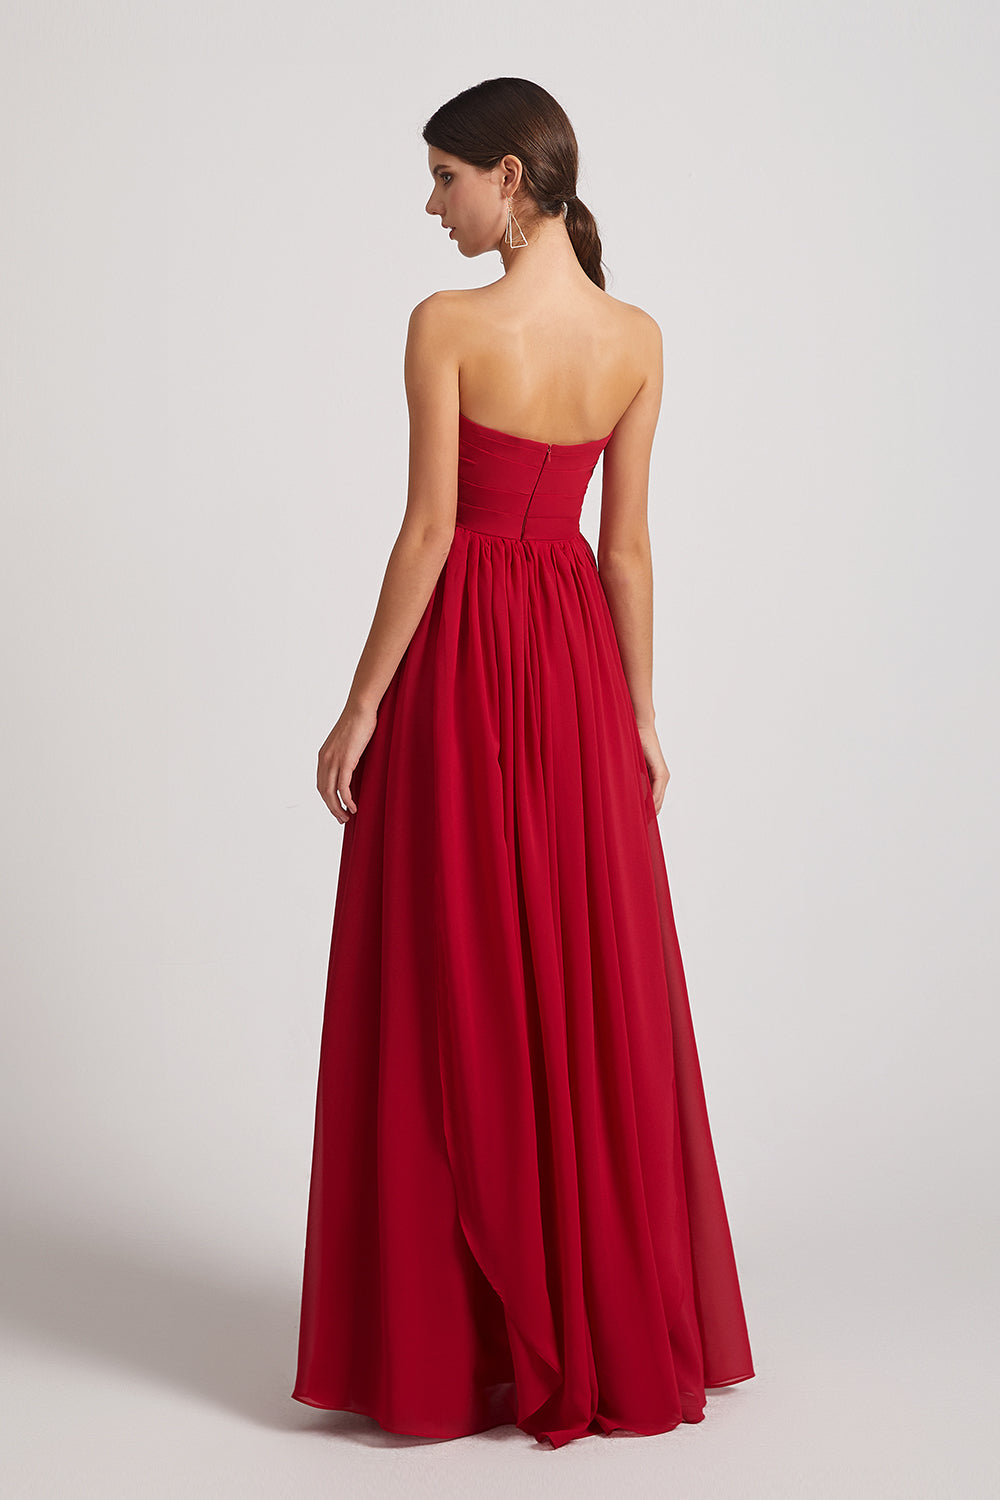 backless a-line chiffon bridesmaid gowns